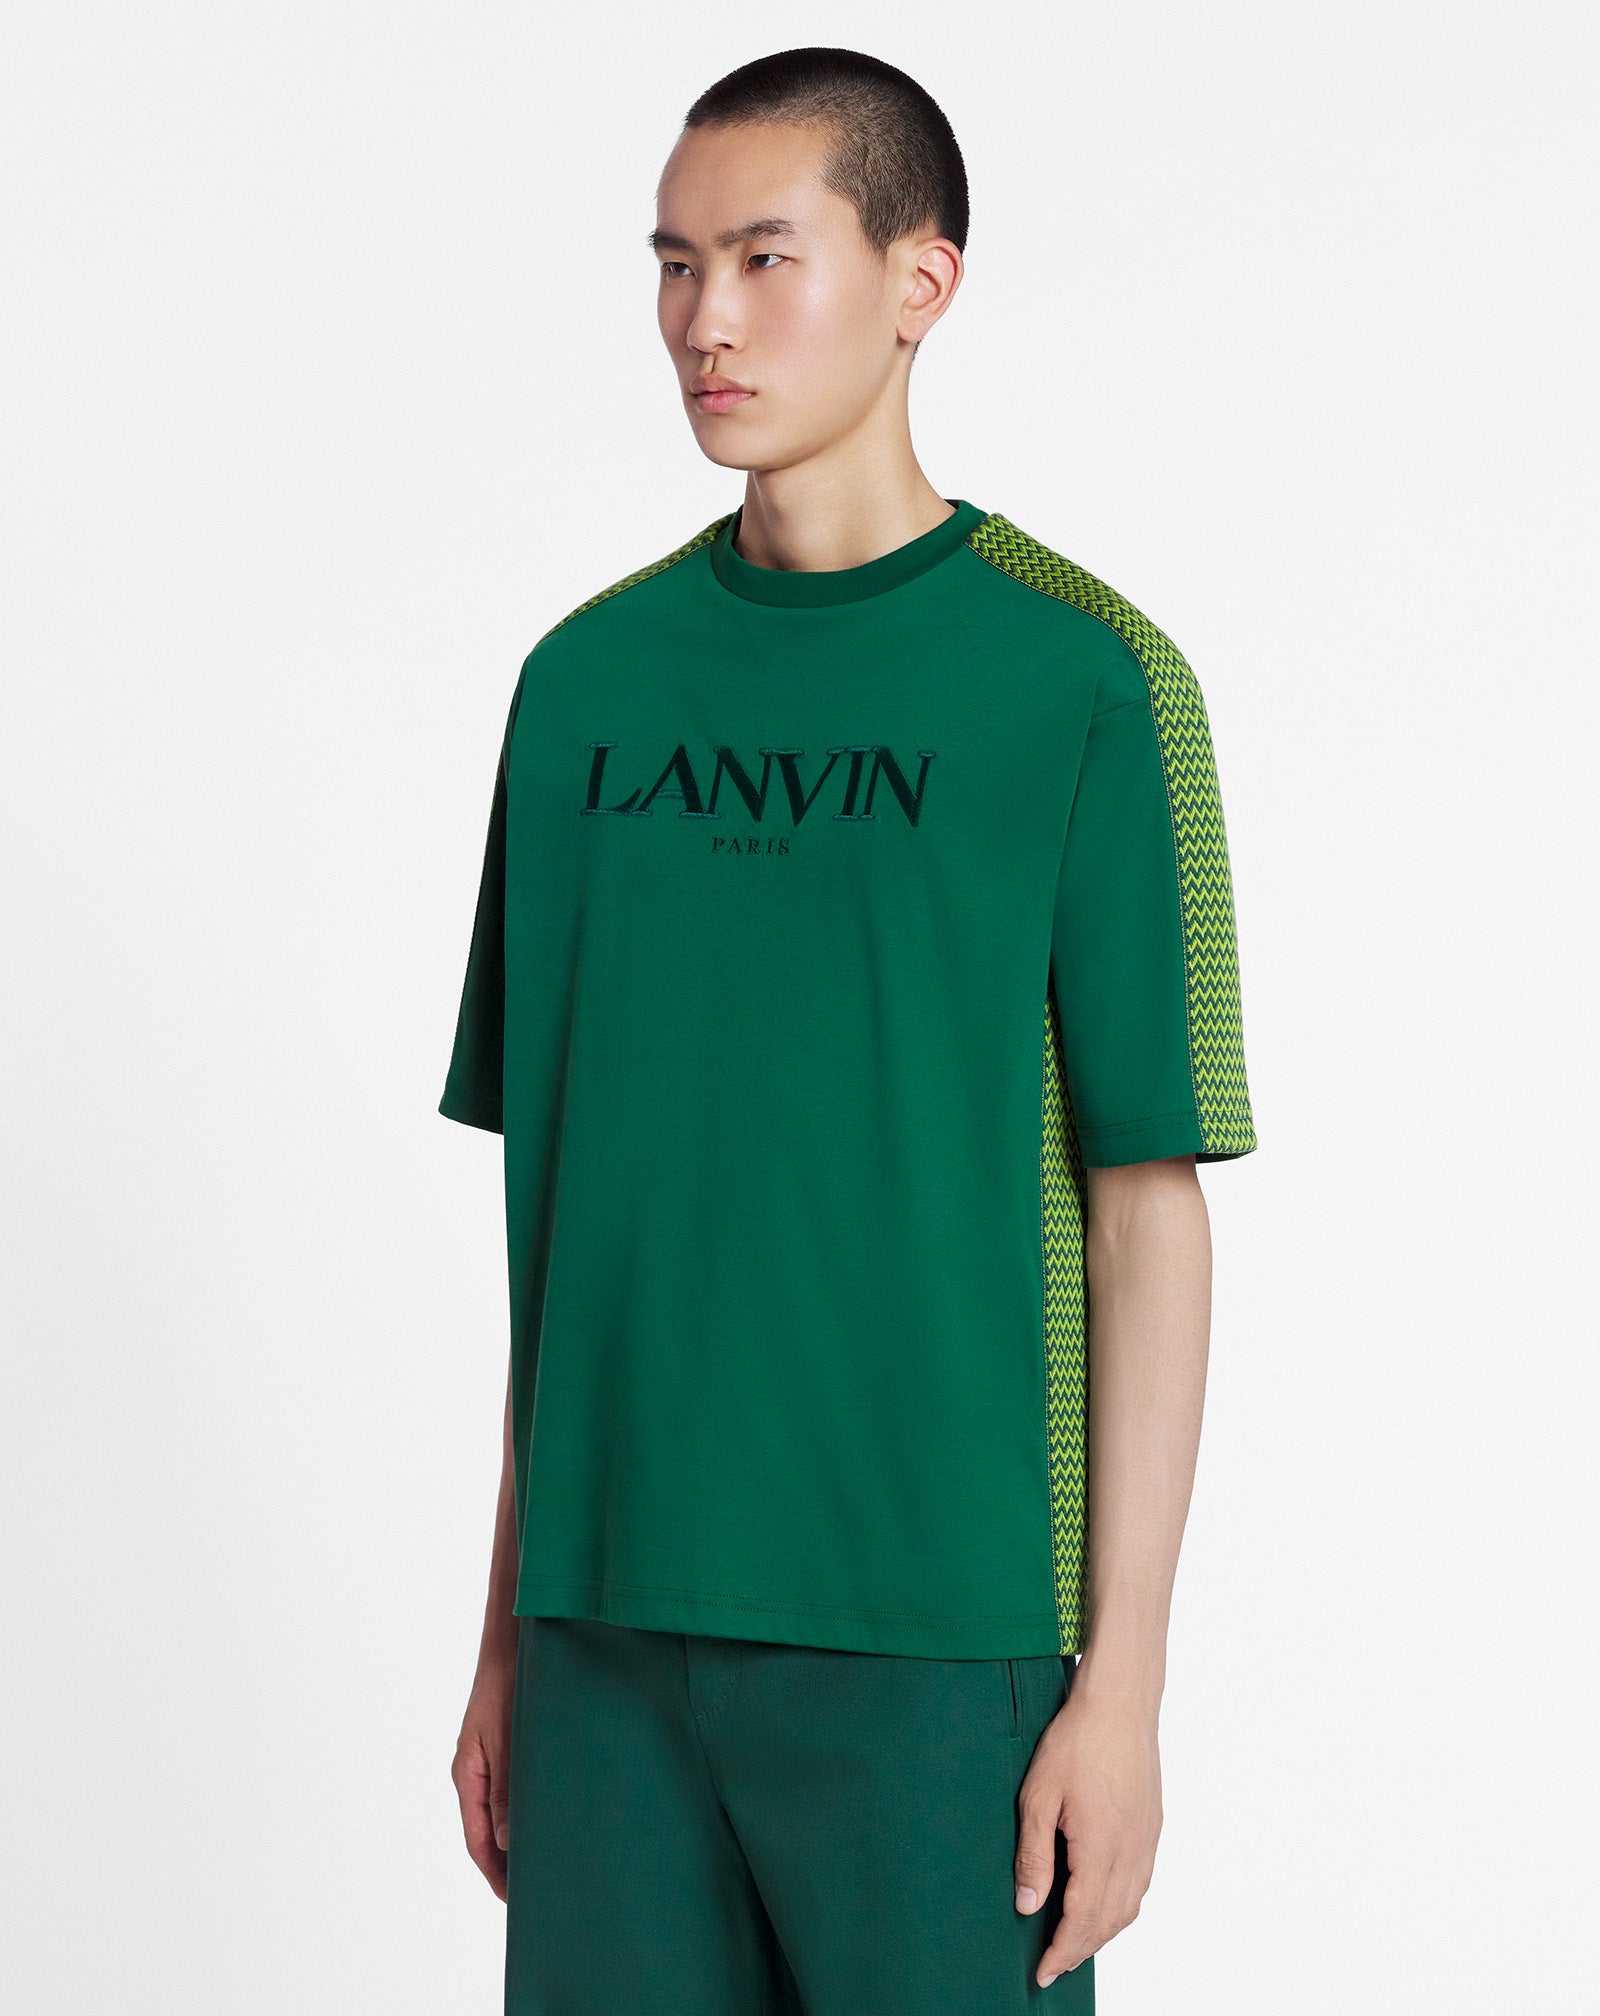 Curb side lanvin embroidered loose-fitting t-shirt